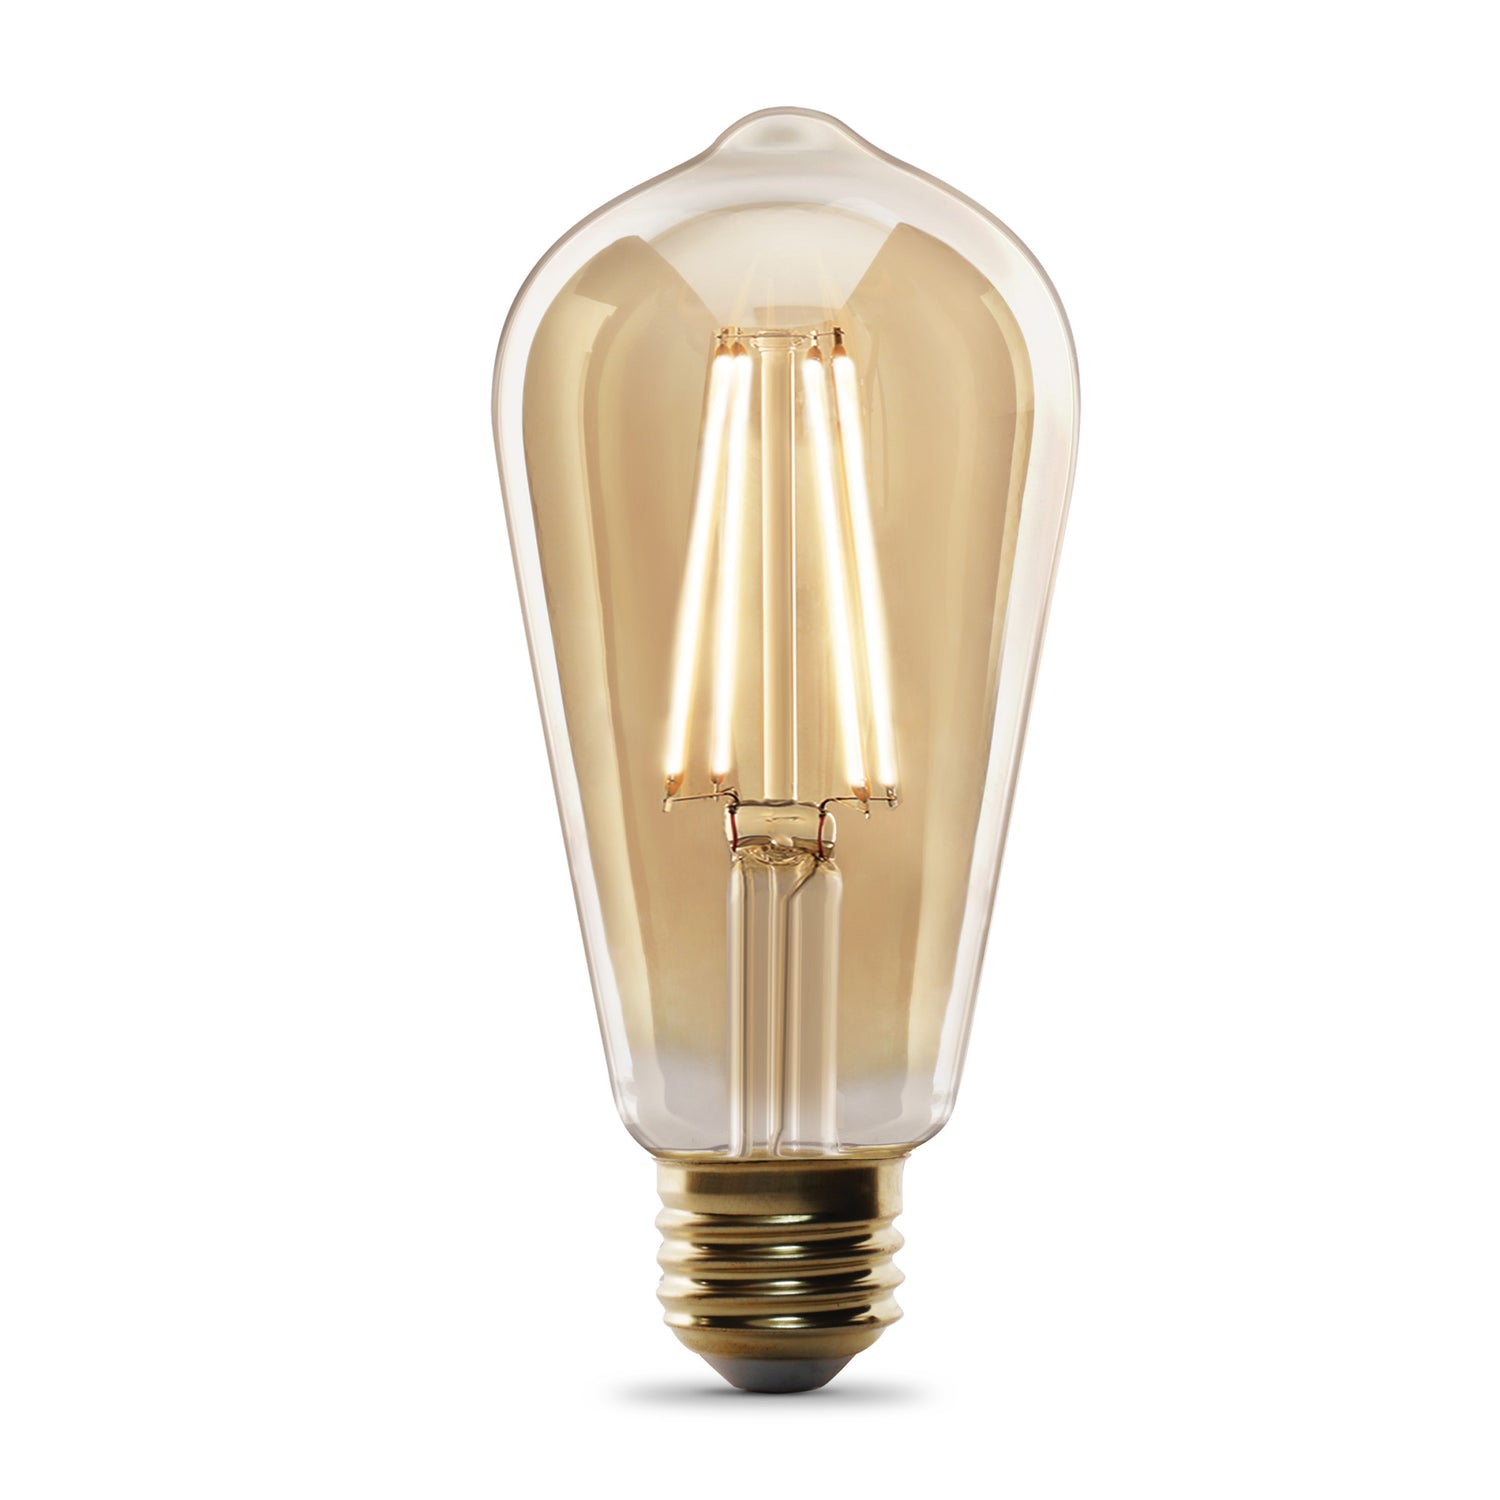 5.5W (60W Replacement) ST19 E26 Straight Filament Amber Glass Vintage Edison LED Light Bulb, Soft White (2-Pack)